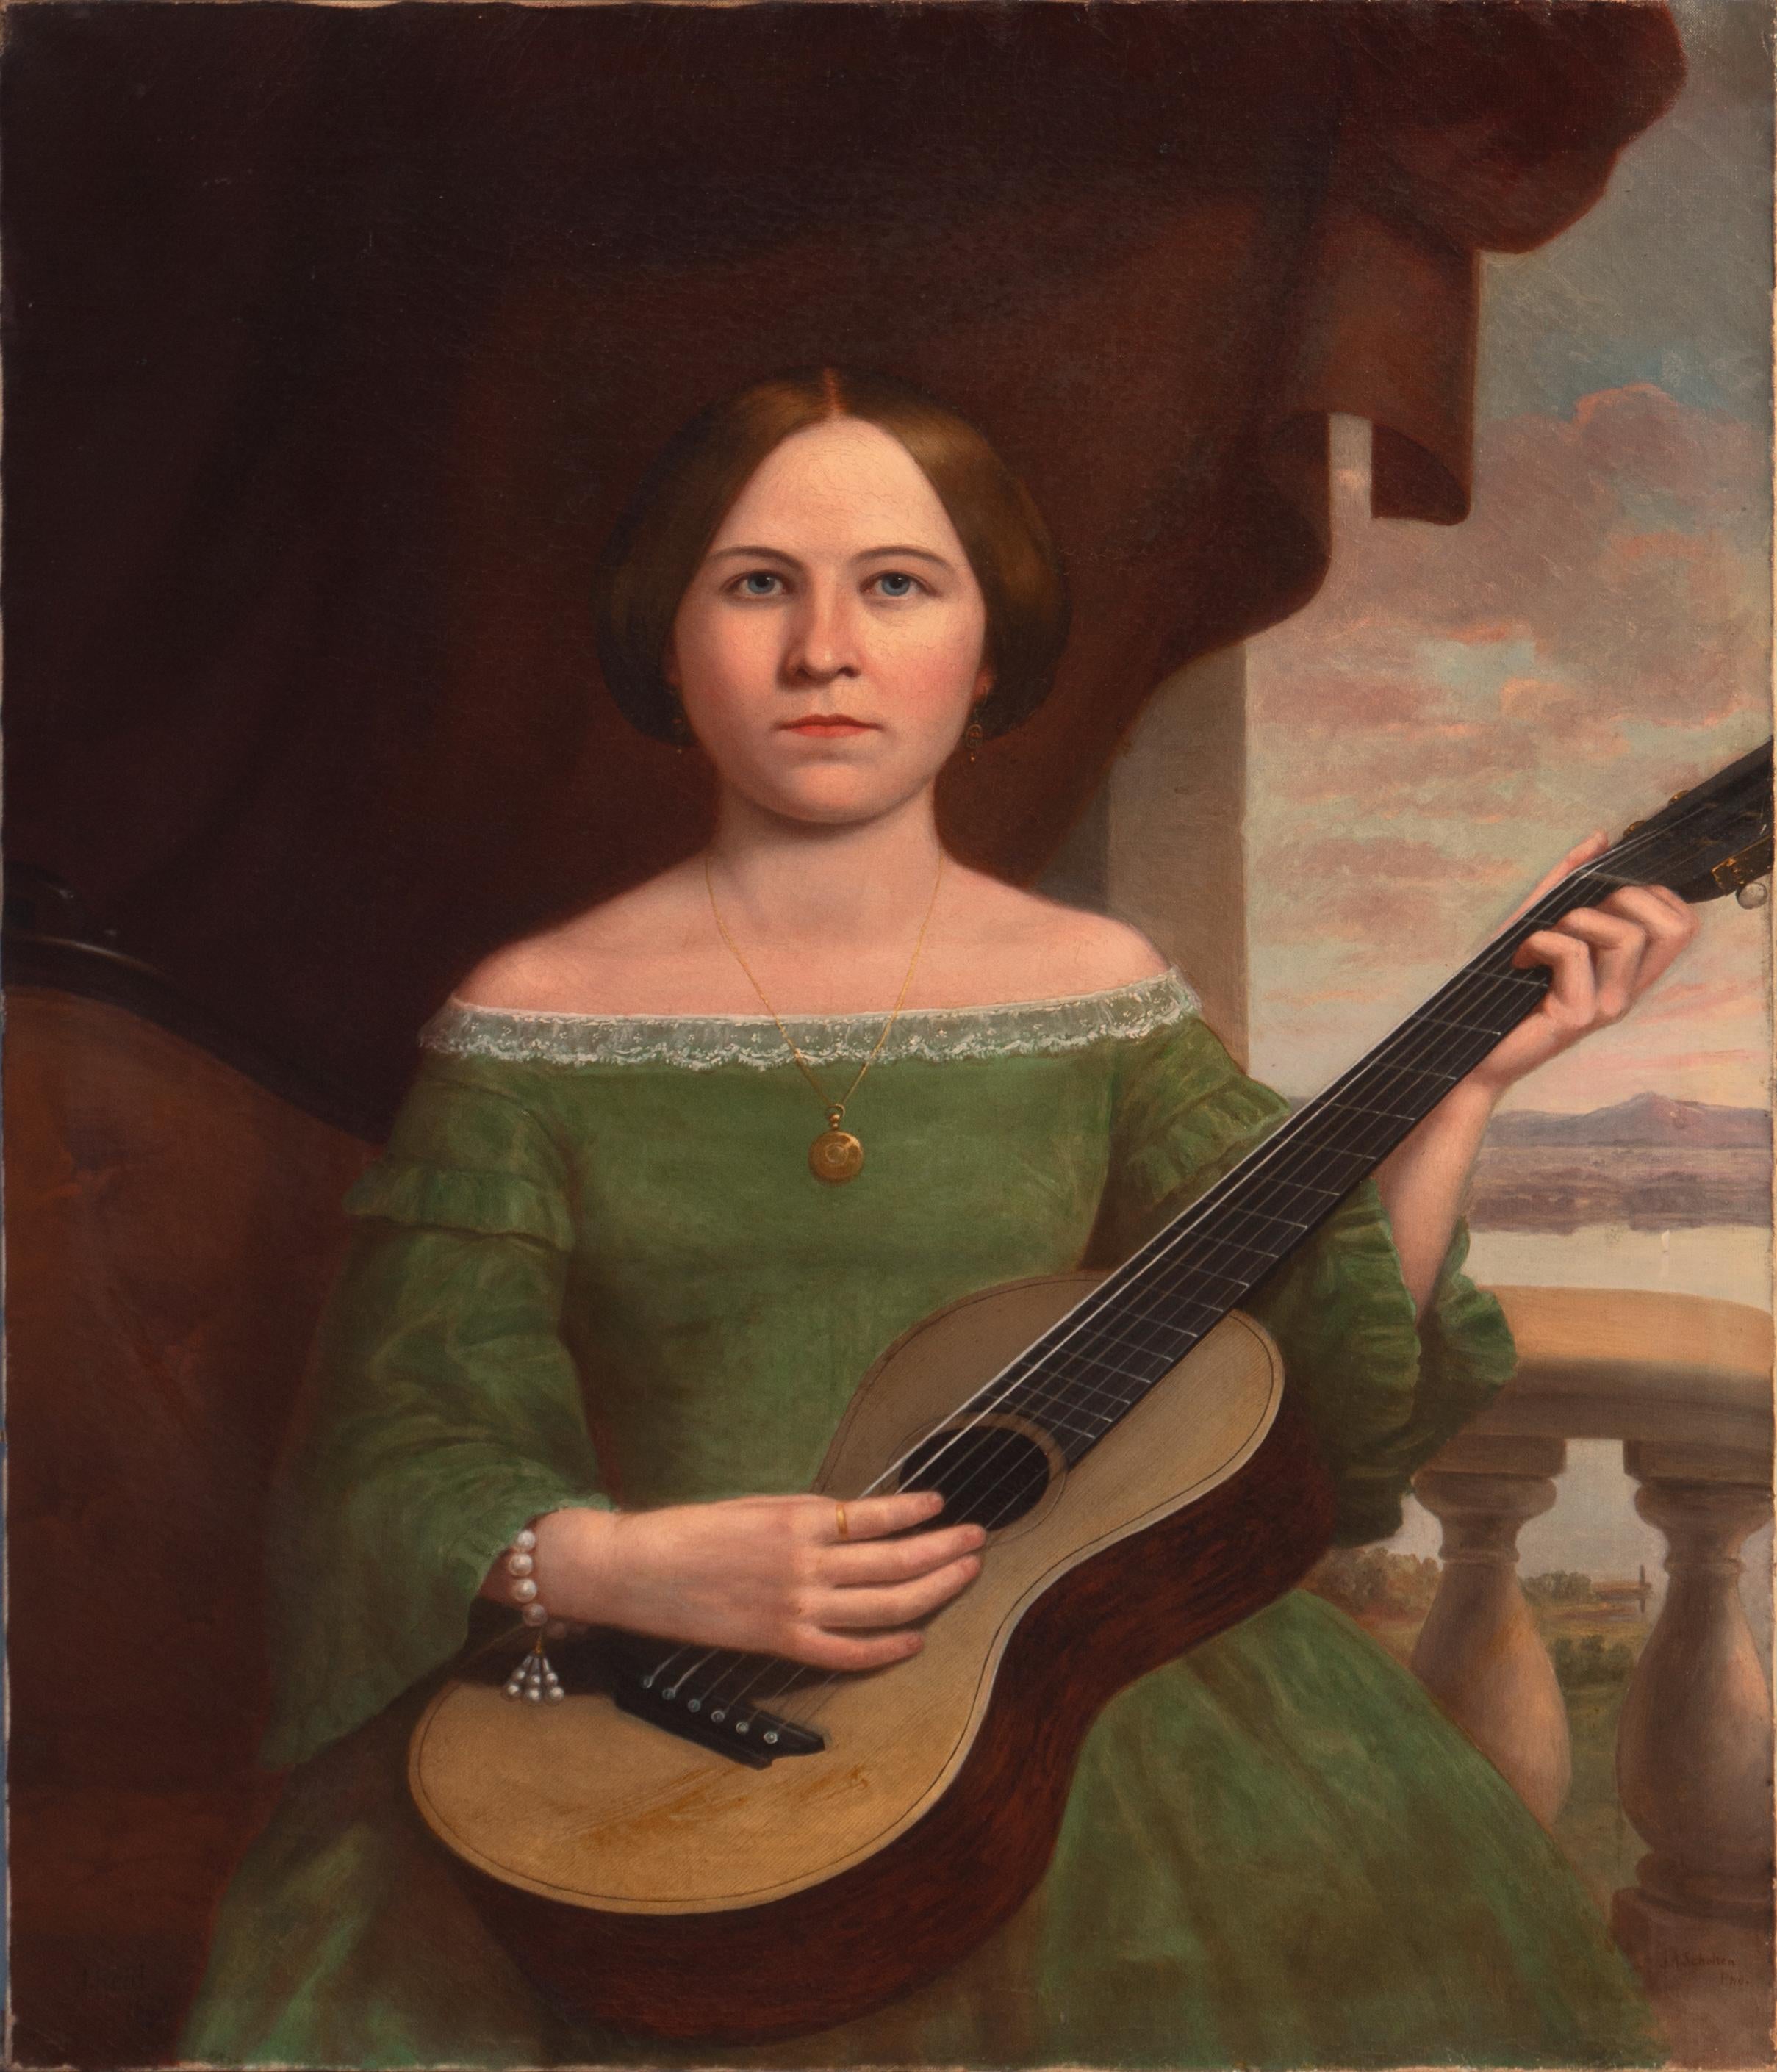 J. Reid Figurative Painting - 'Young Lady Playing a Guitar', St. Louis Socialite, Early Cincinnati Photography